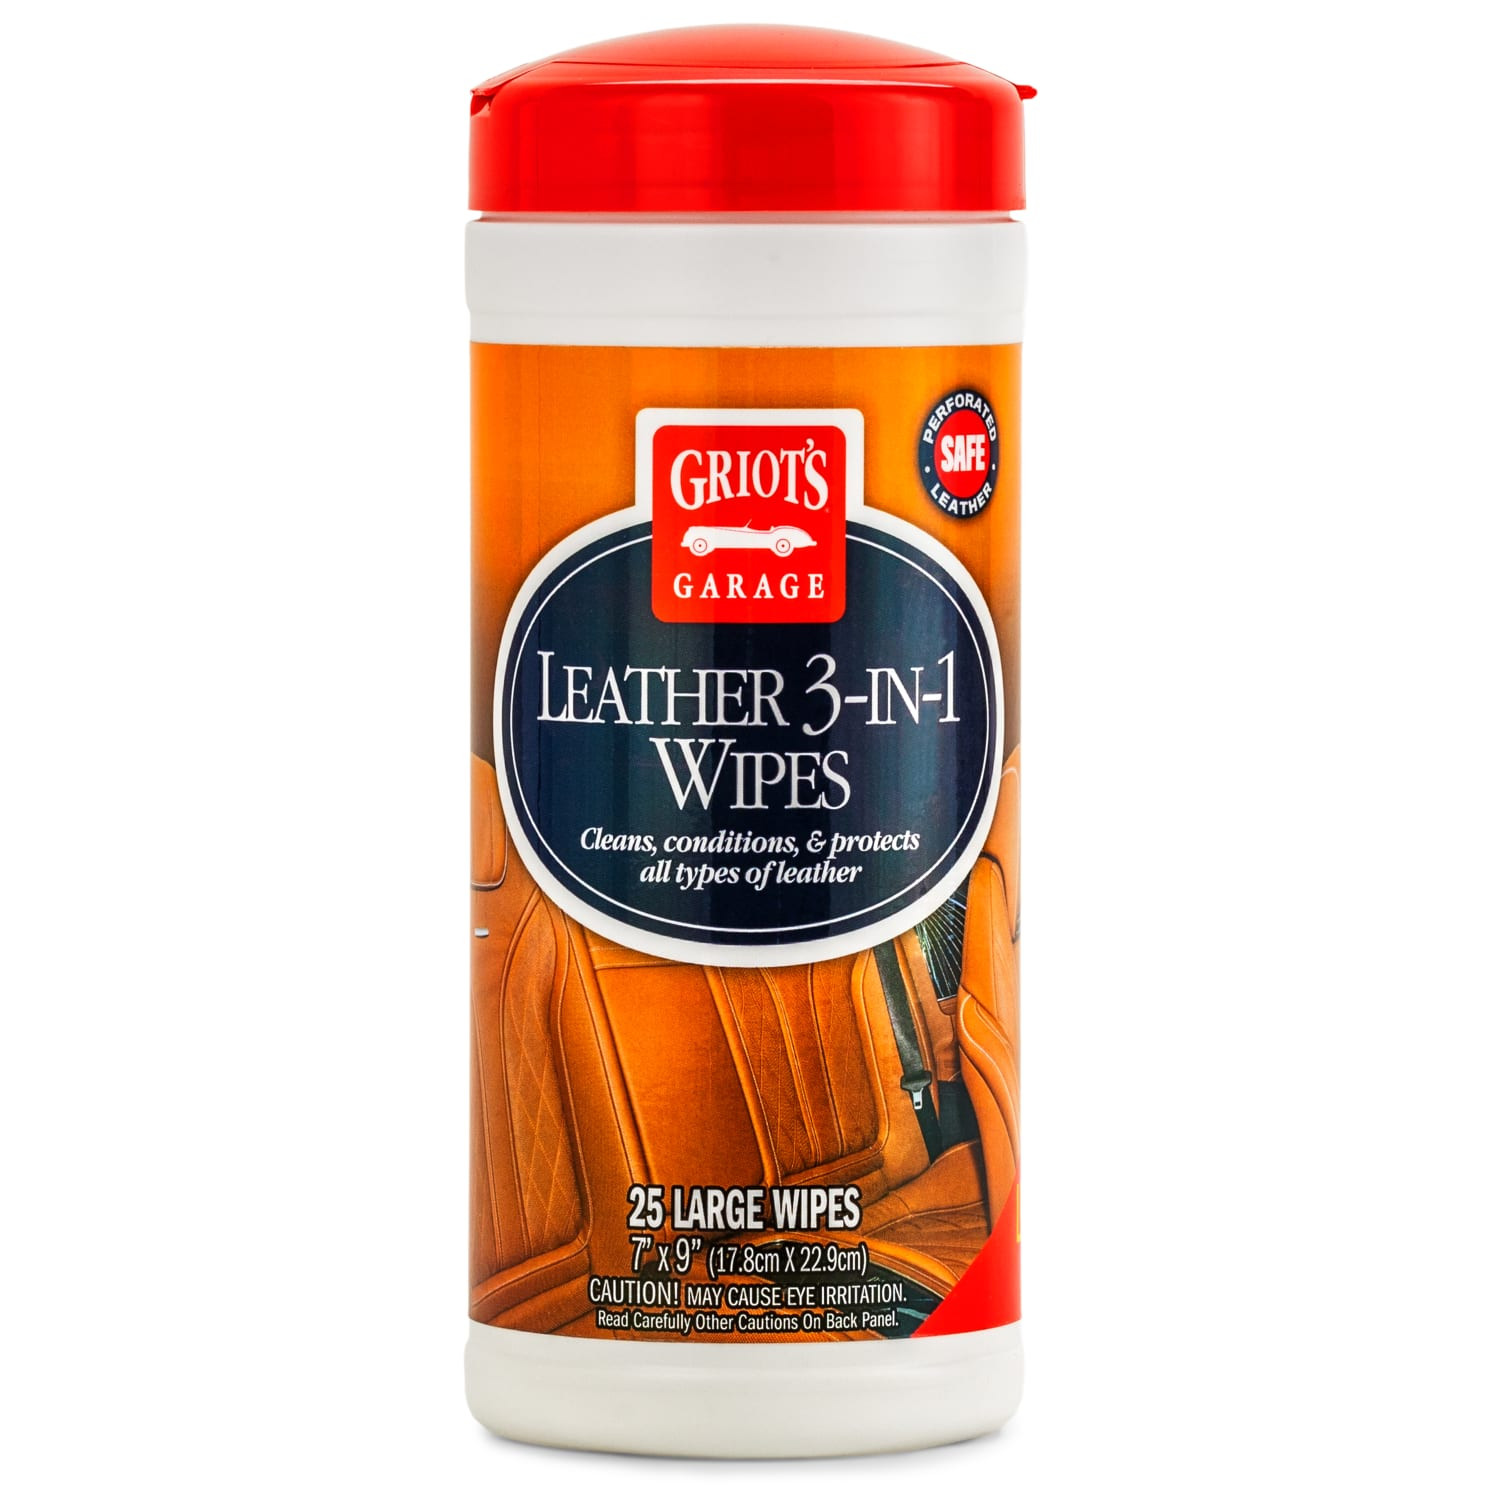 Griots Garage's New Leather Cleaner Test